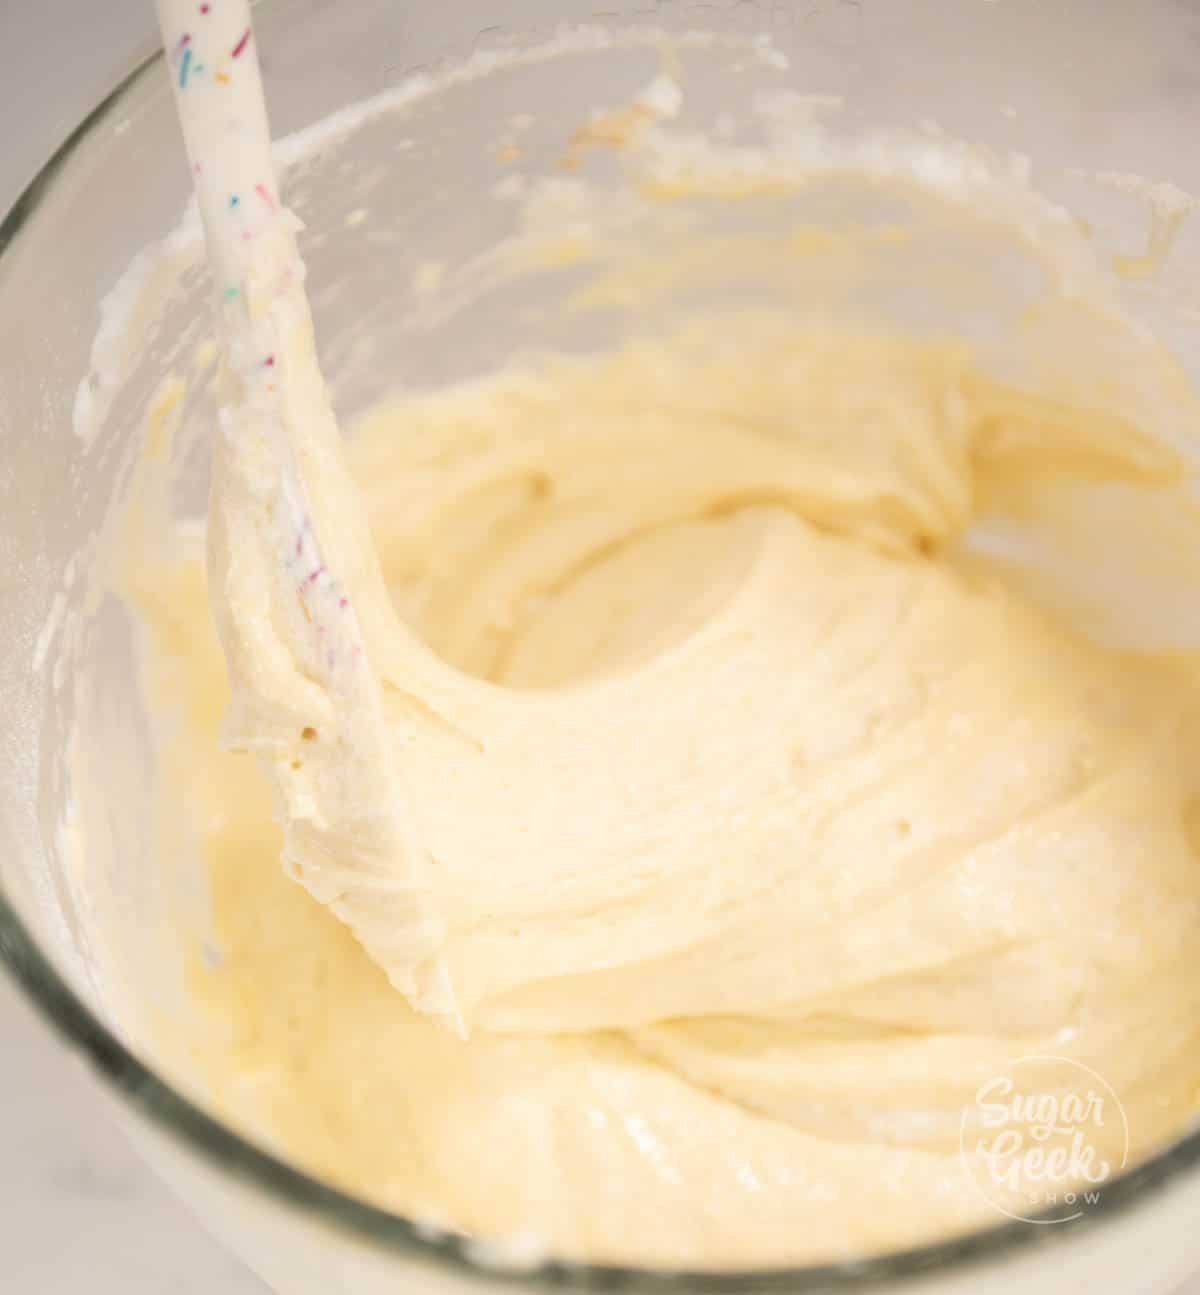 Spatula inside mixing bowl filled with batter.